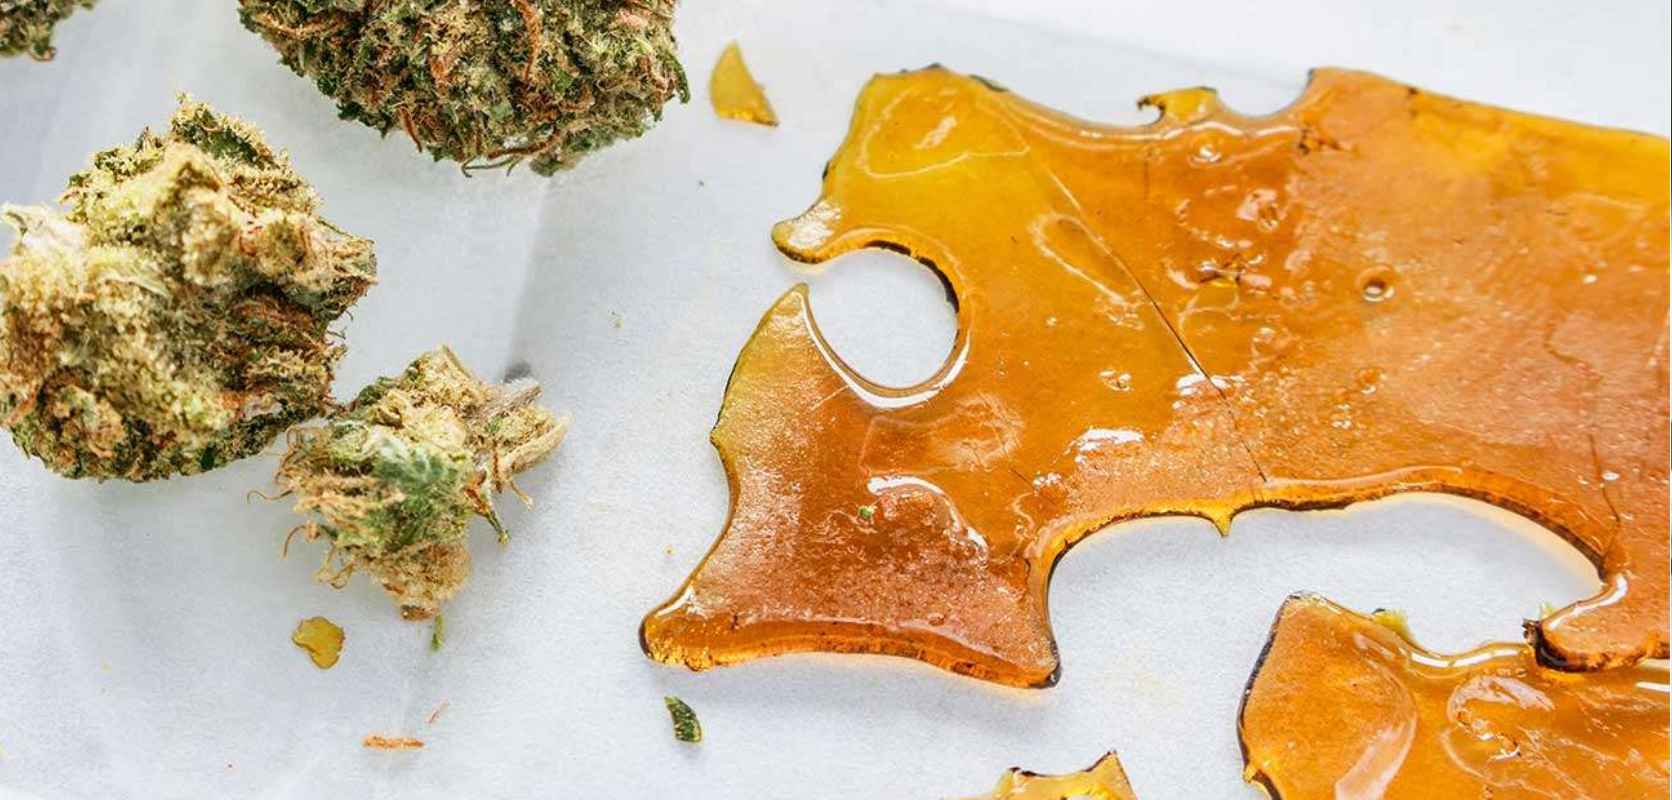 Shatter is a cannabis concentrate noted for its solid, translucent, and glass-like appearance. 